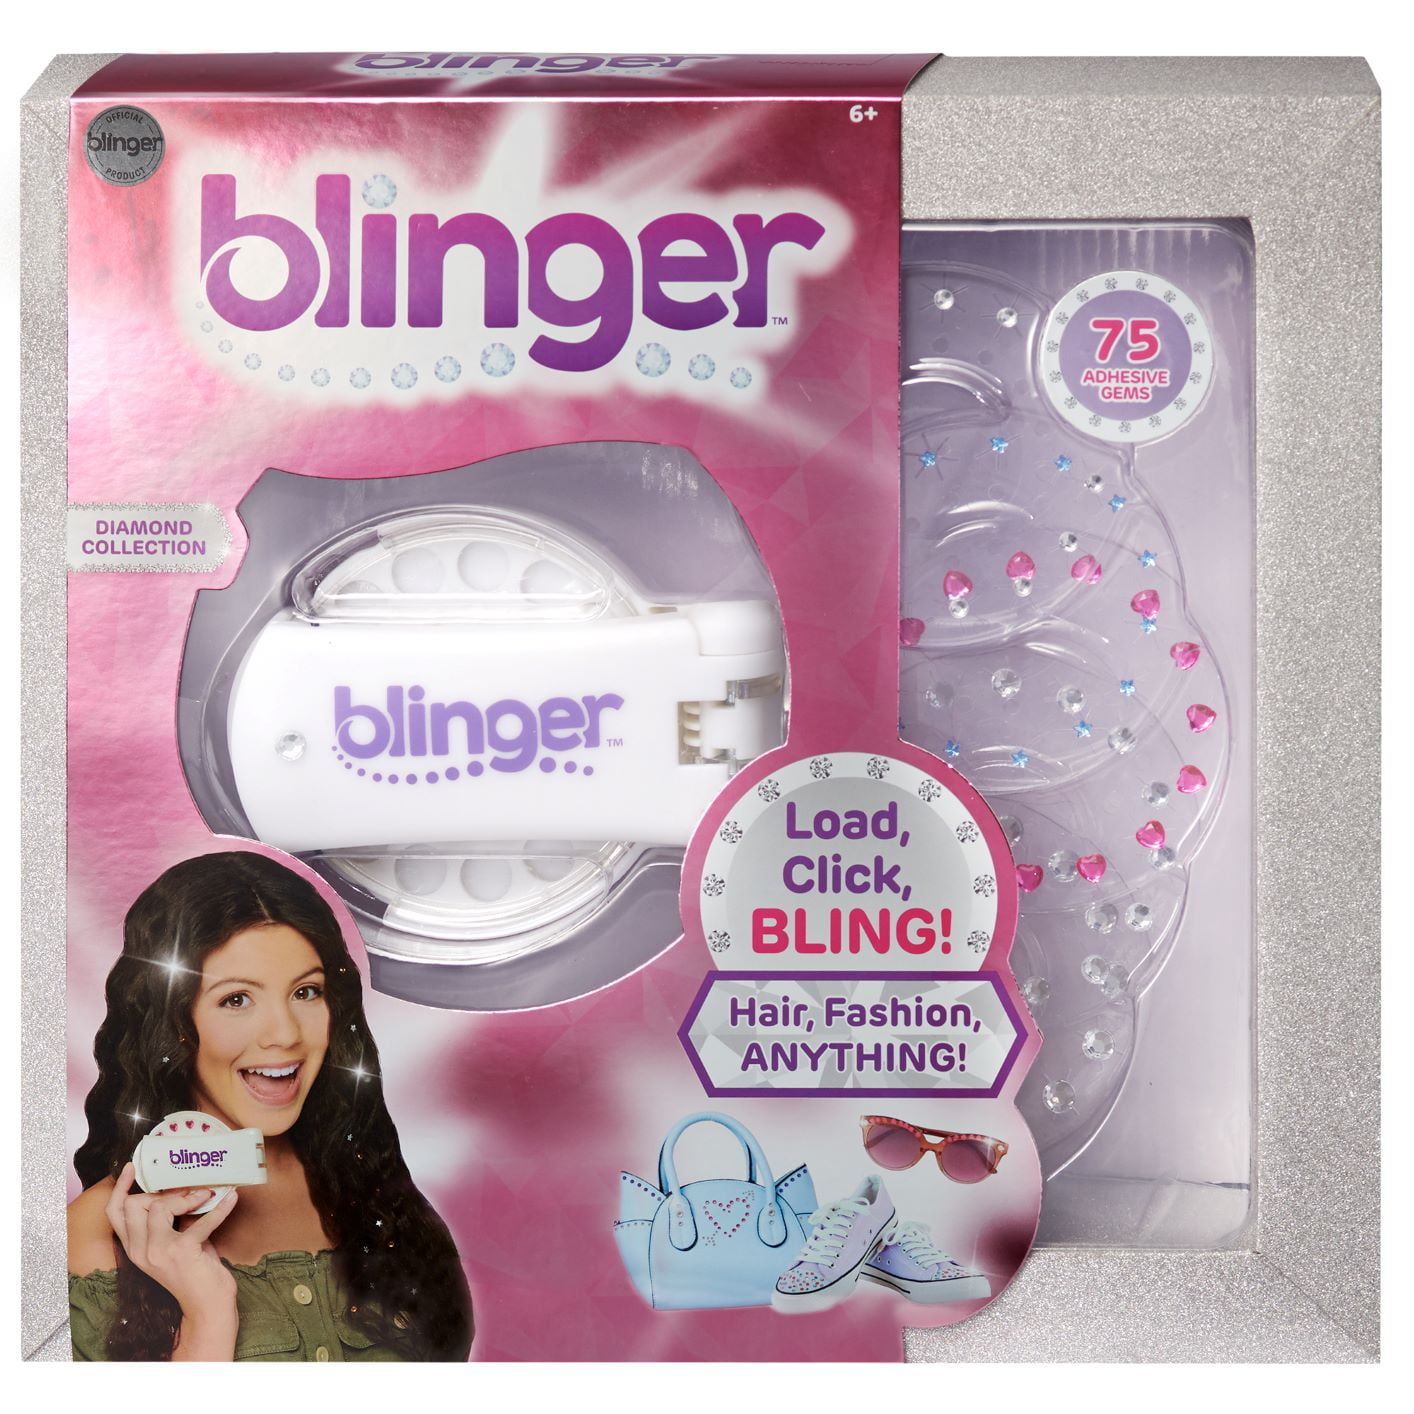 BLINGER DIAMOND COLLECTION New in box Bling anything Hair Fashion as seen on TV 